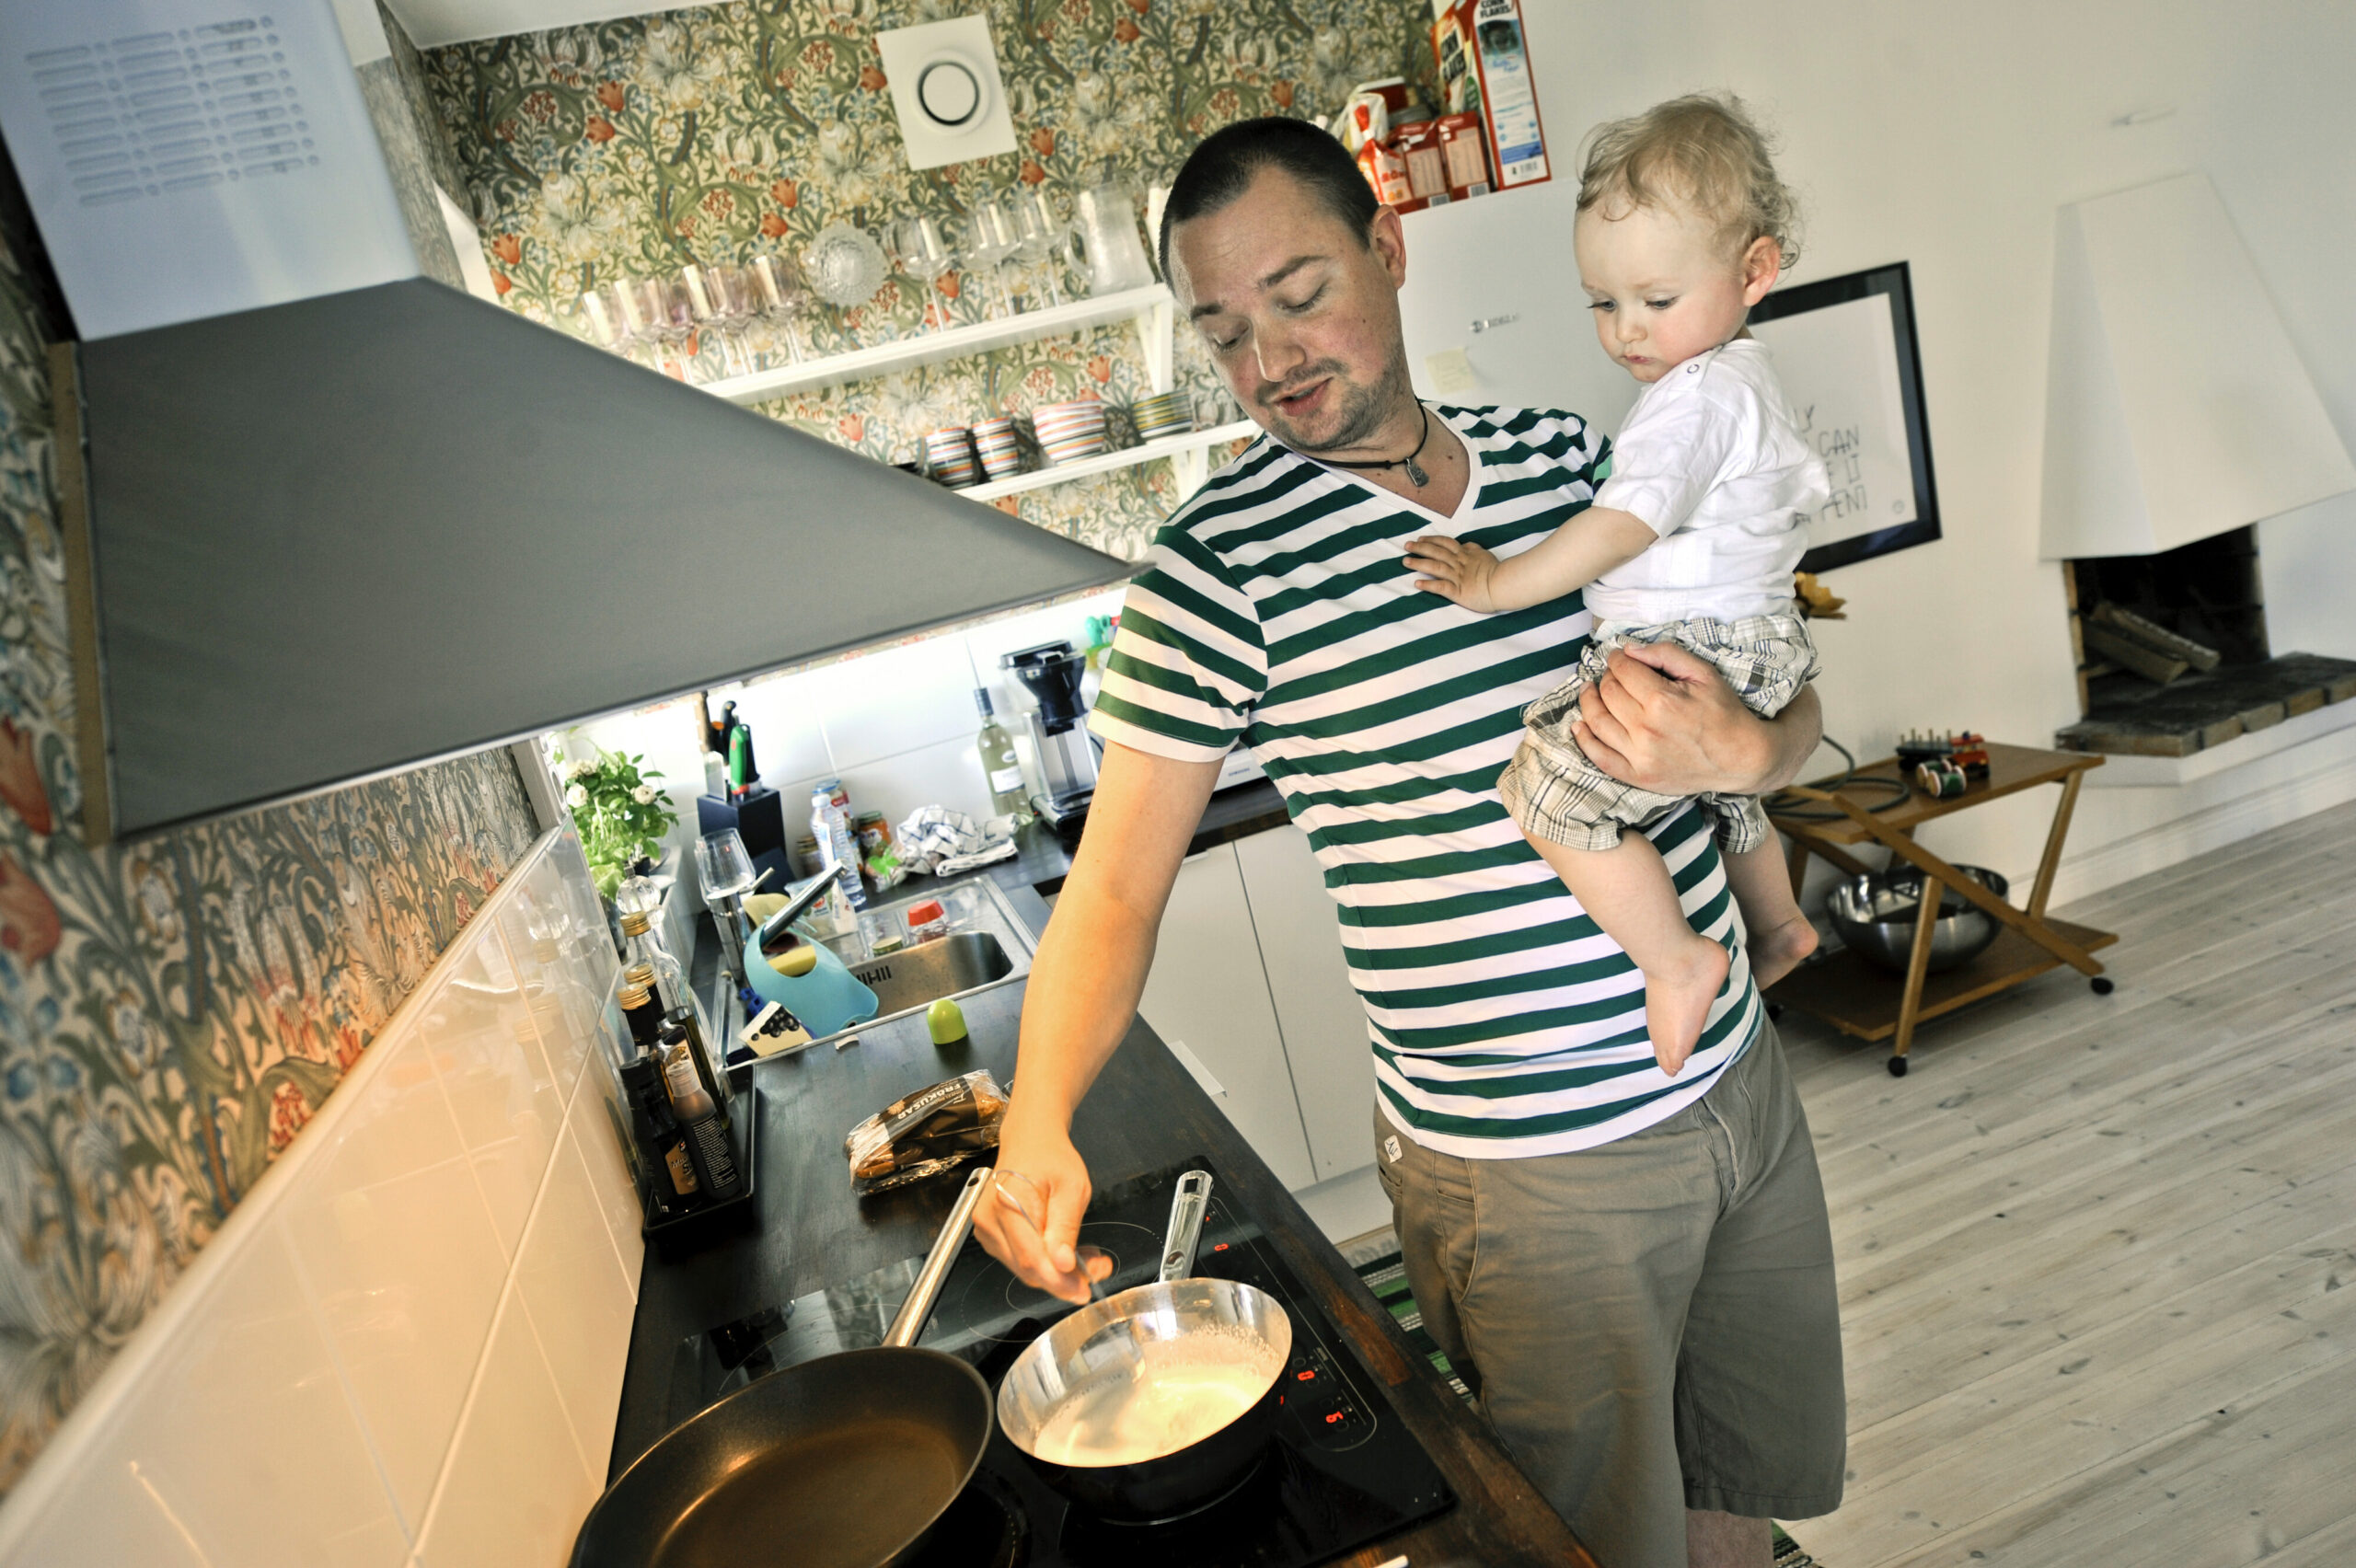 A Swedish man cooks while holding his son in his other arm